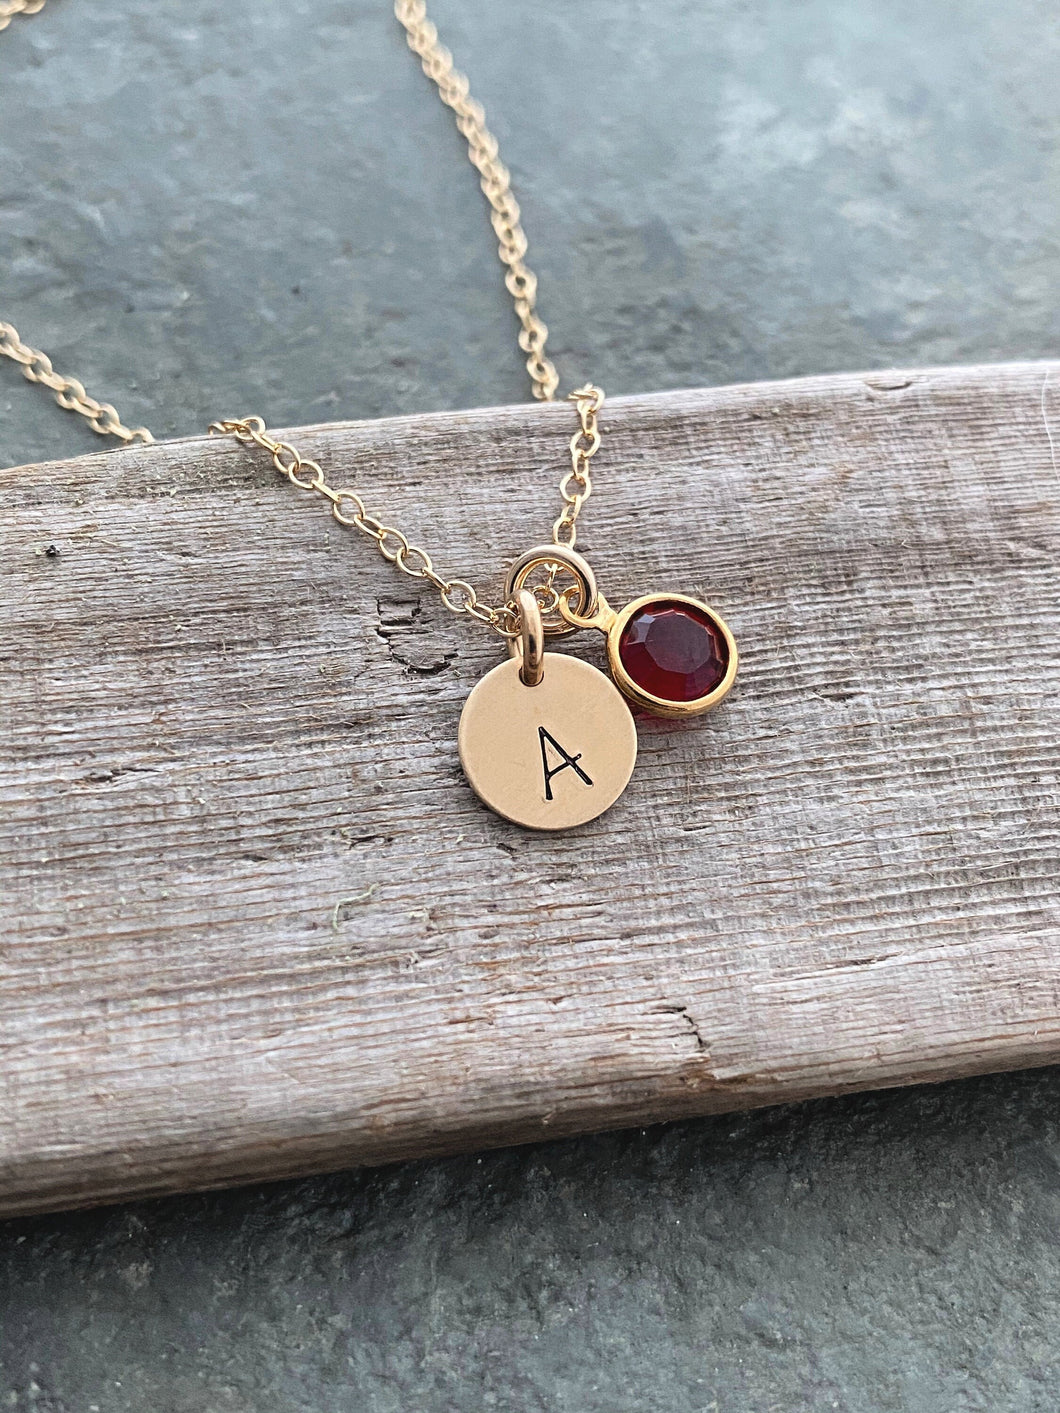 Initial Jewelry 14k Gold Filled Personalized Initial Necklace, Simple Monogram, Single Charm Rustic with Birthstone, Gift for Birthday